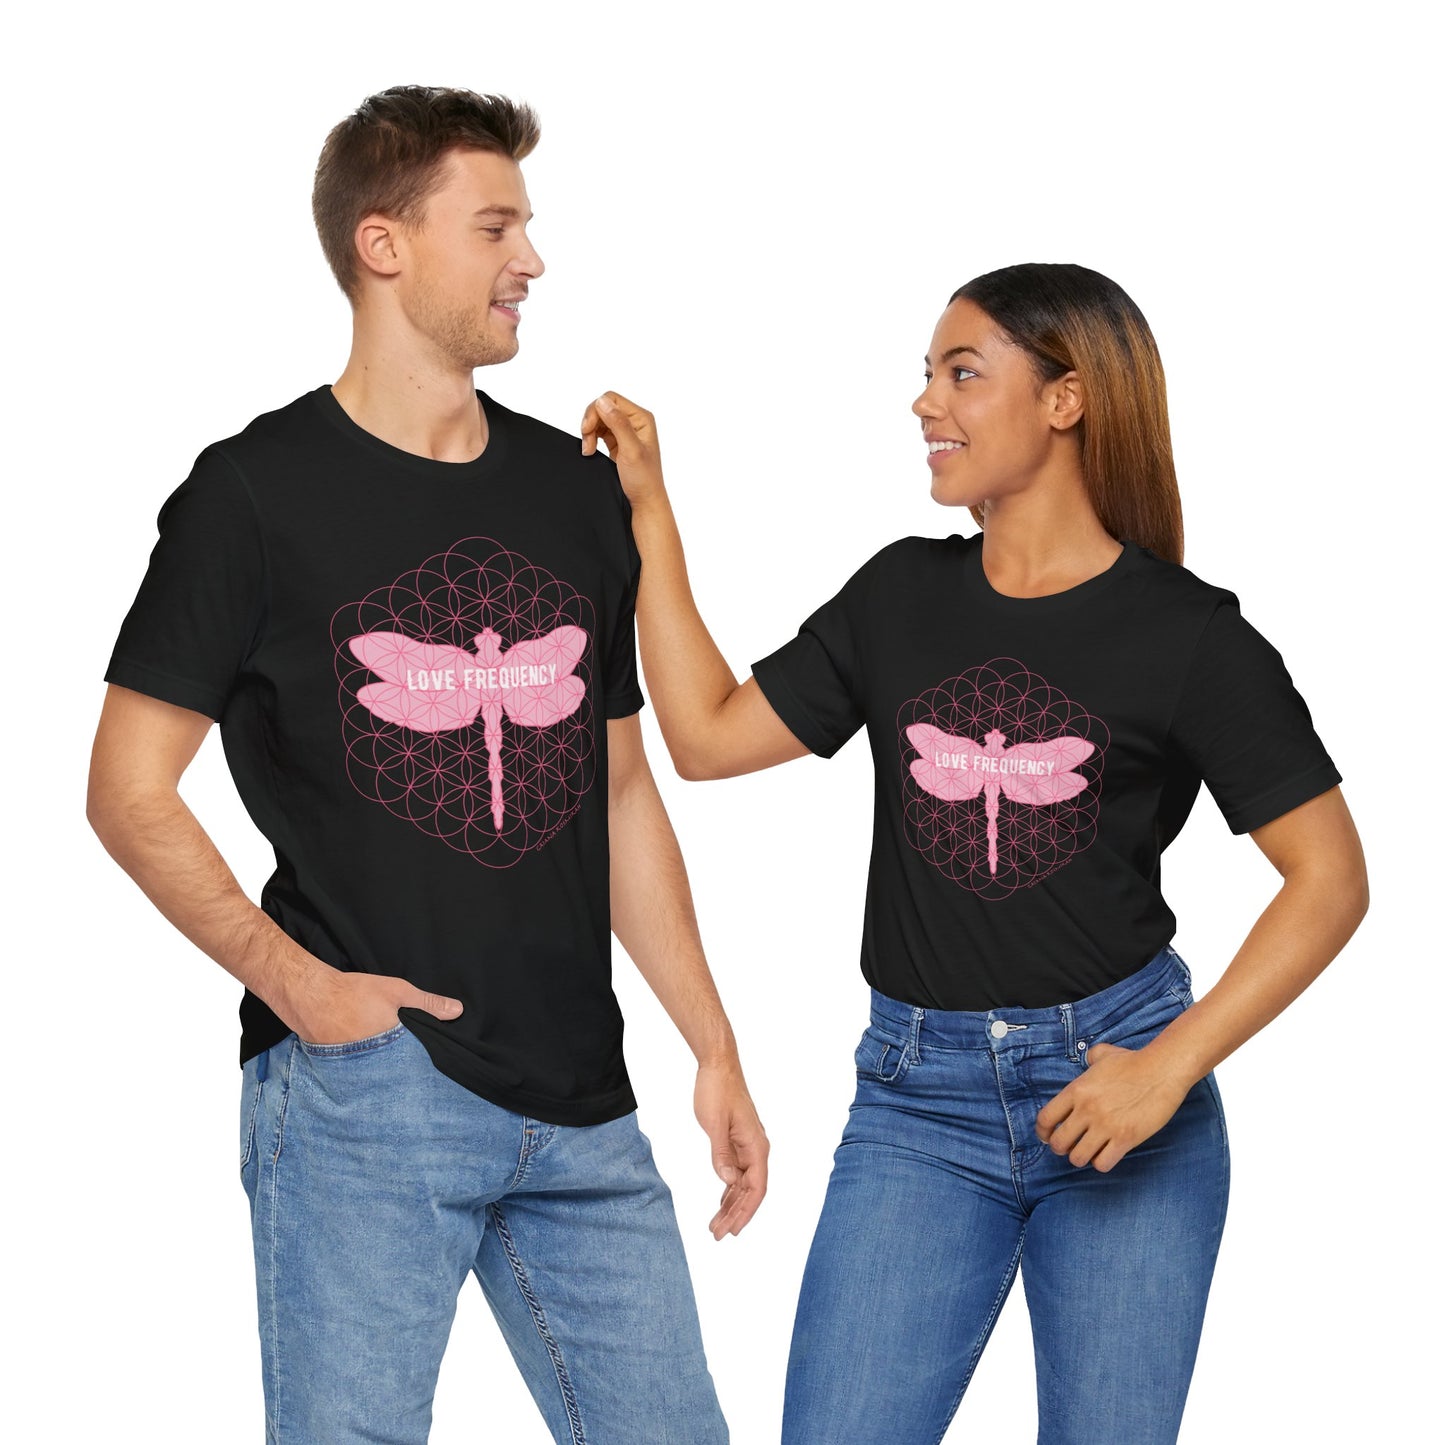 Love Frequency Dragonfly Unisex Jersey Short Sleeve Tee | Love Dragonfly Flower of Life Shirt | Love Dragonfly Sacred Geometry T-Shirt